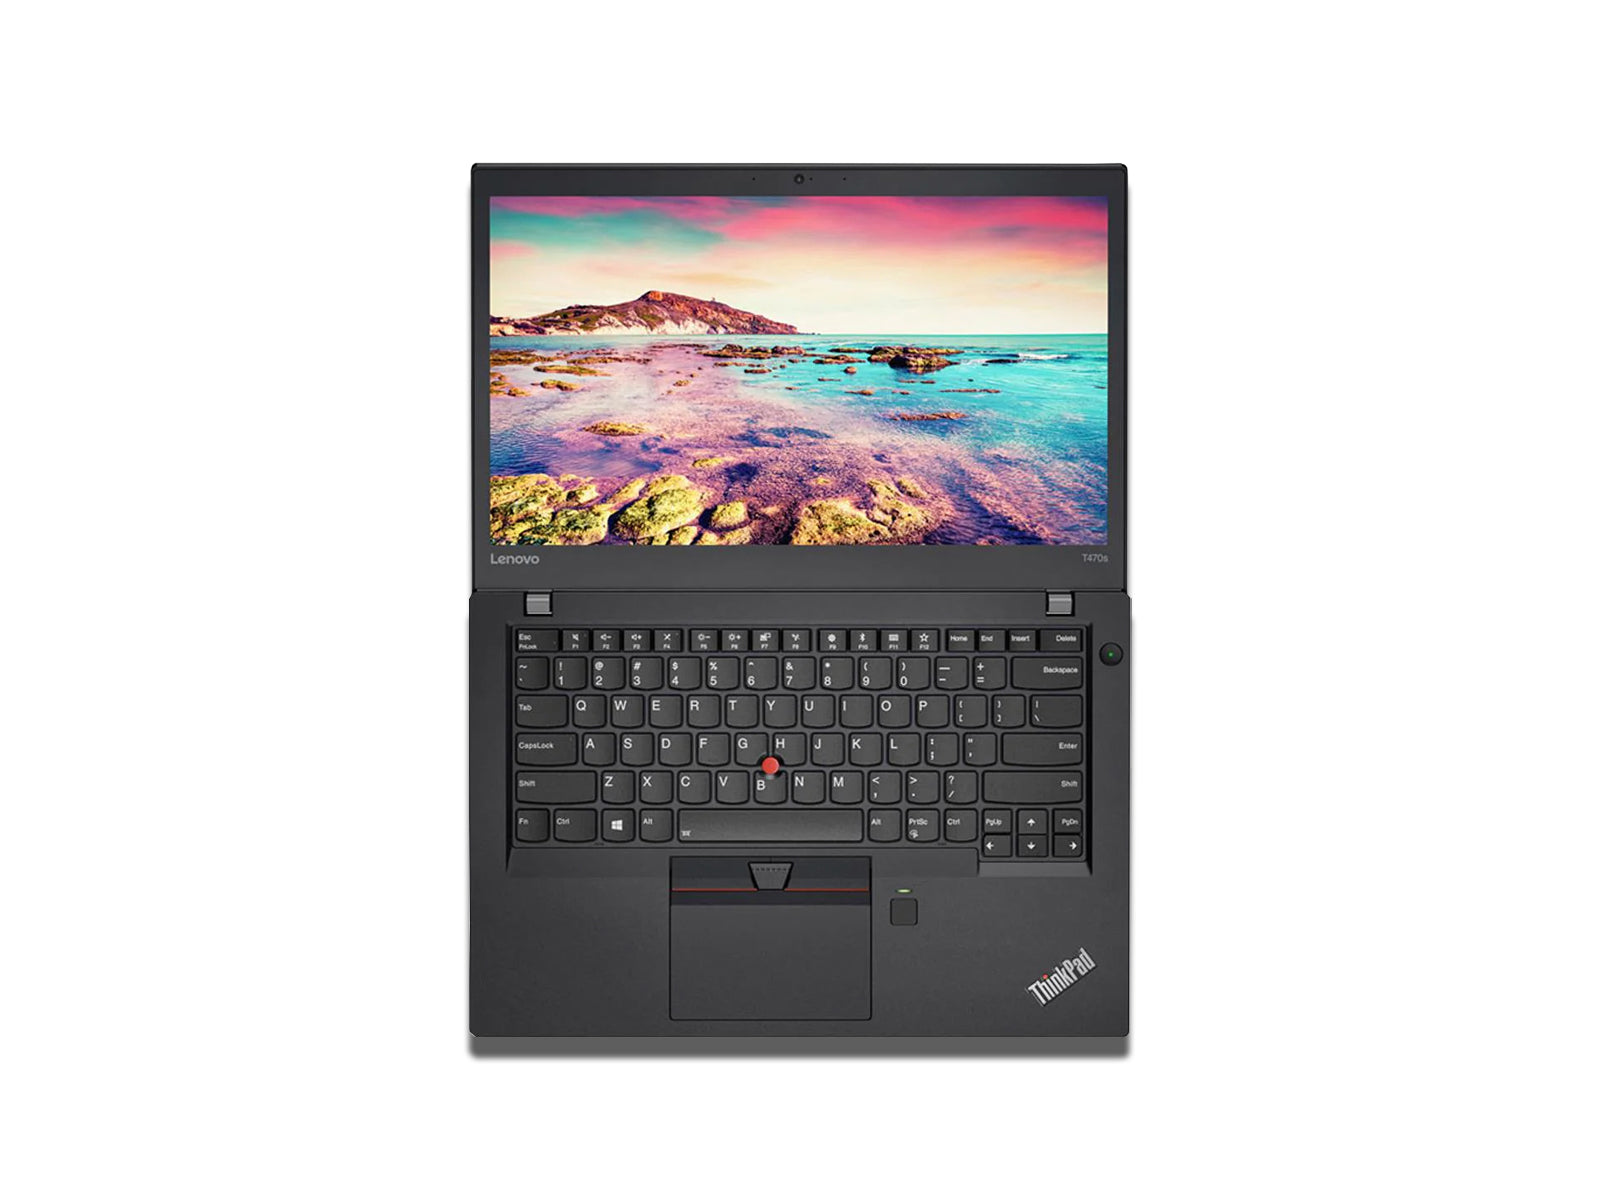 Image view of The Fully Open Lenovo T470s Laptop on The White Background